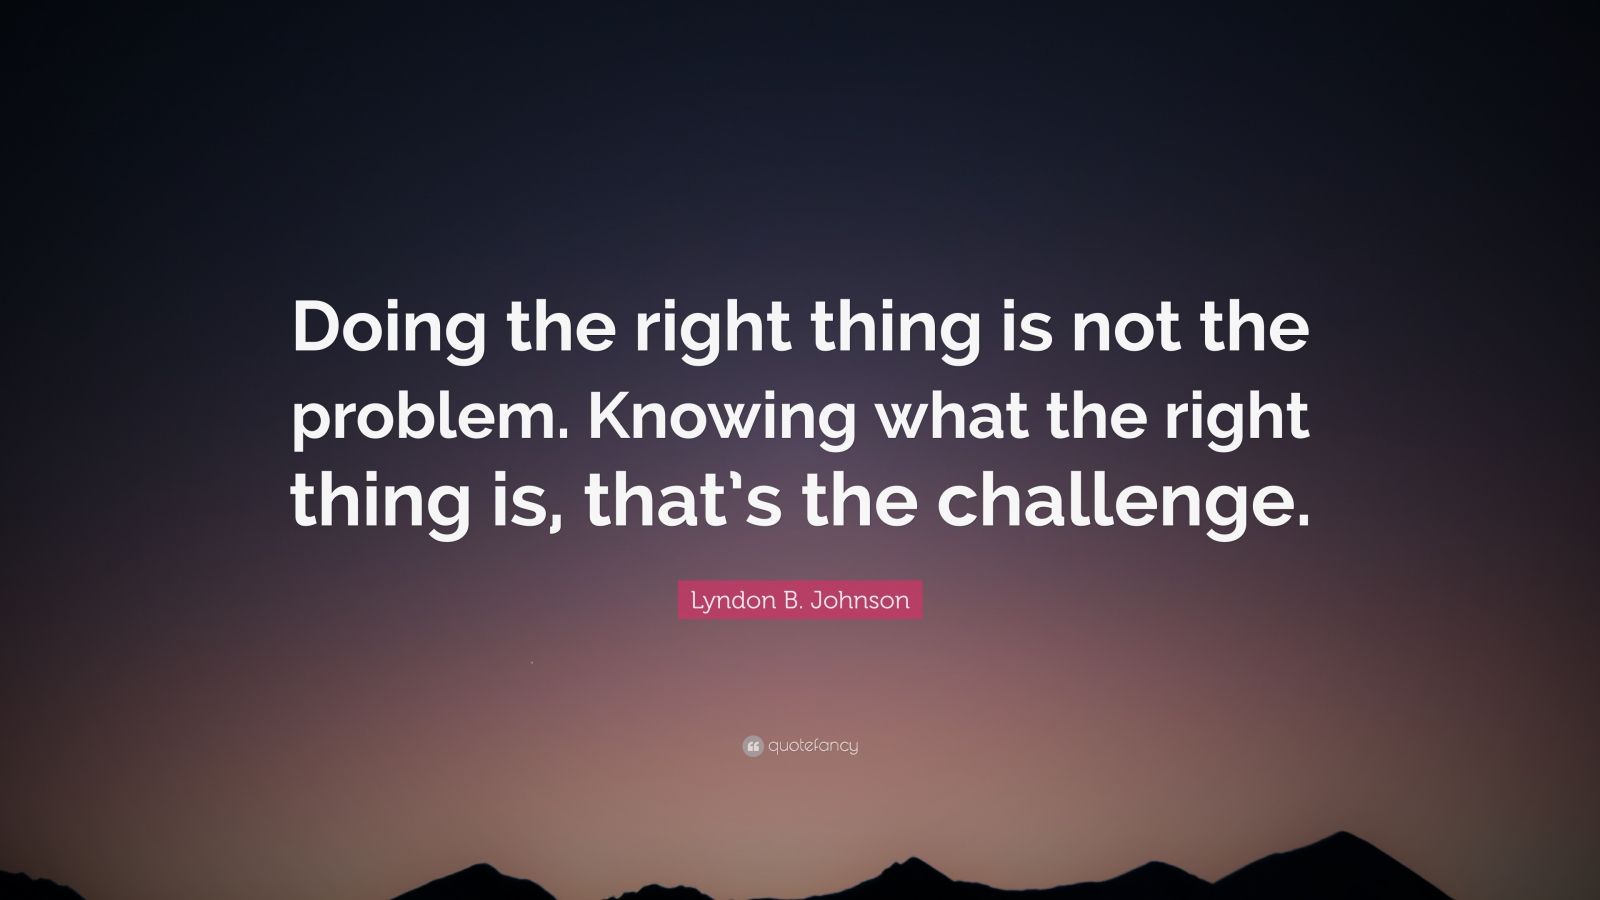 Lyndon B. Johnson Quote: “Doing the right thing is not the problem